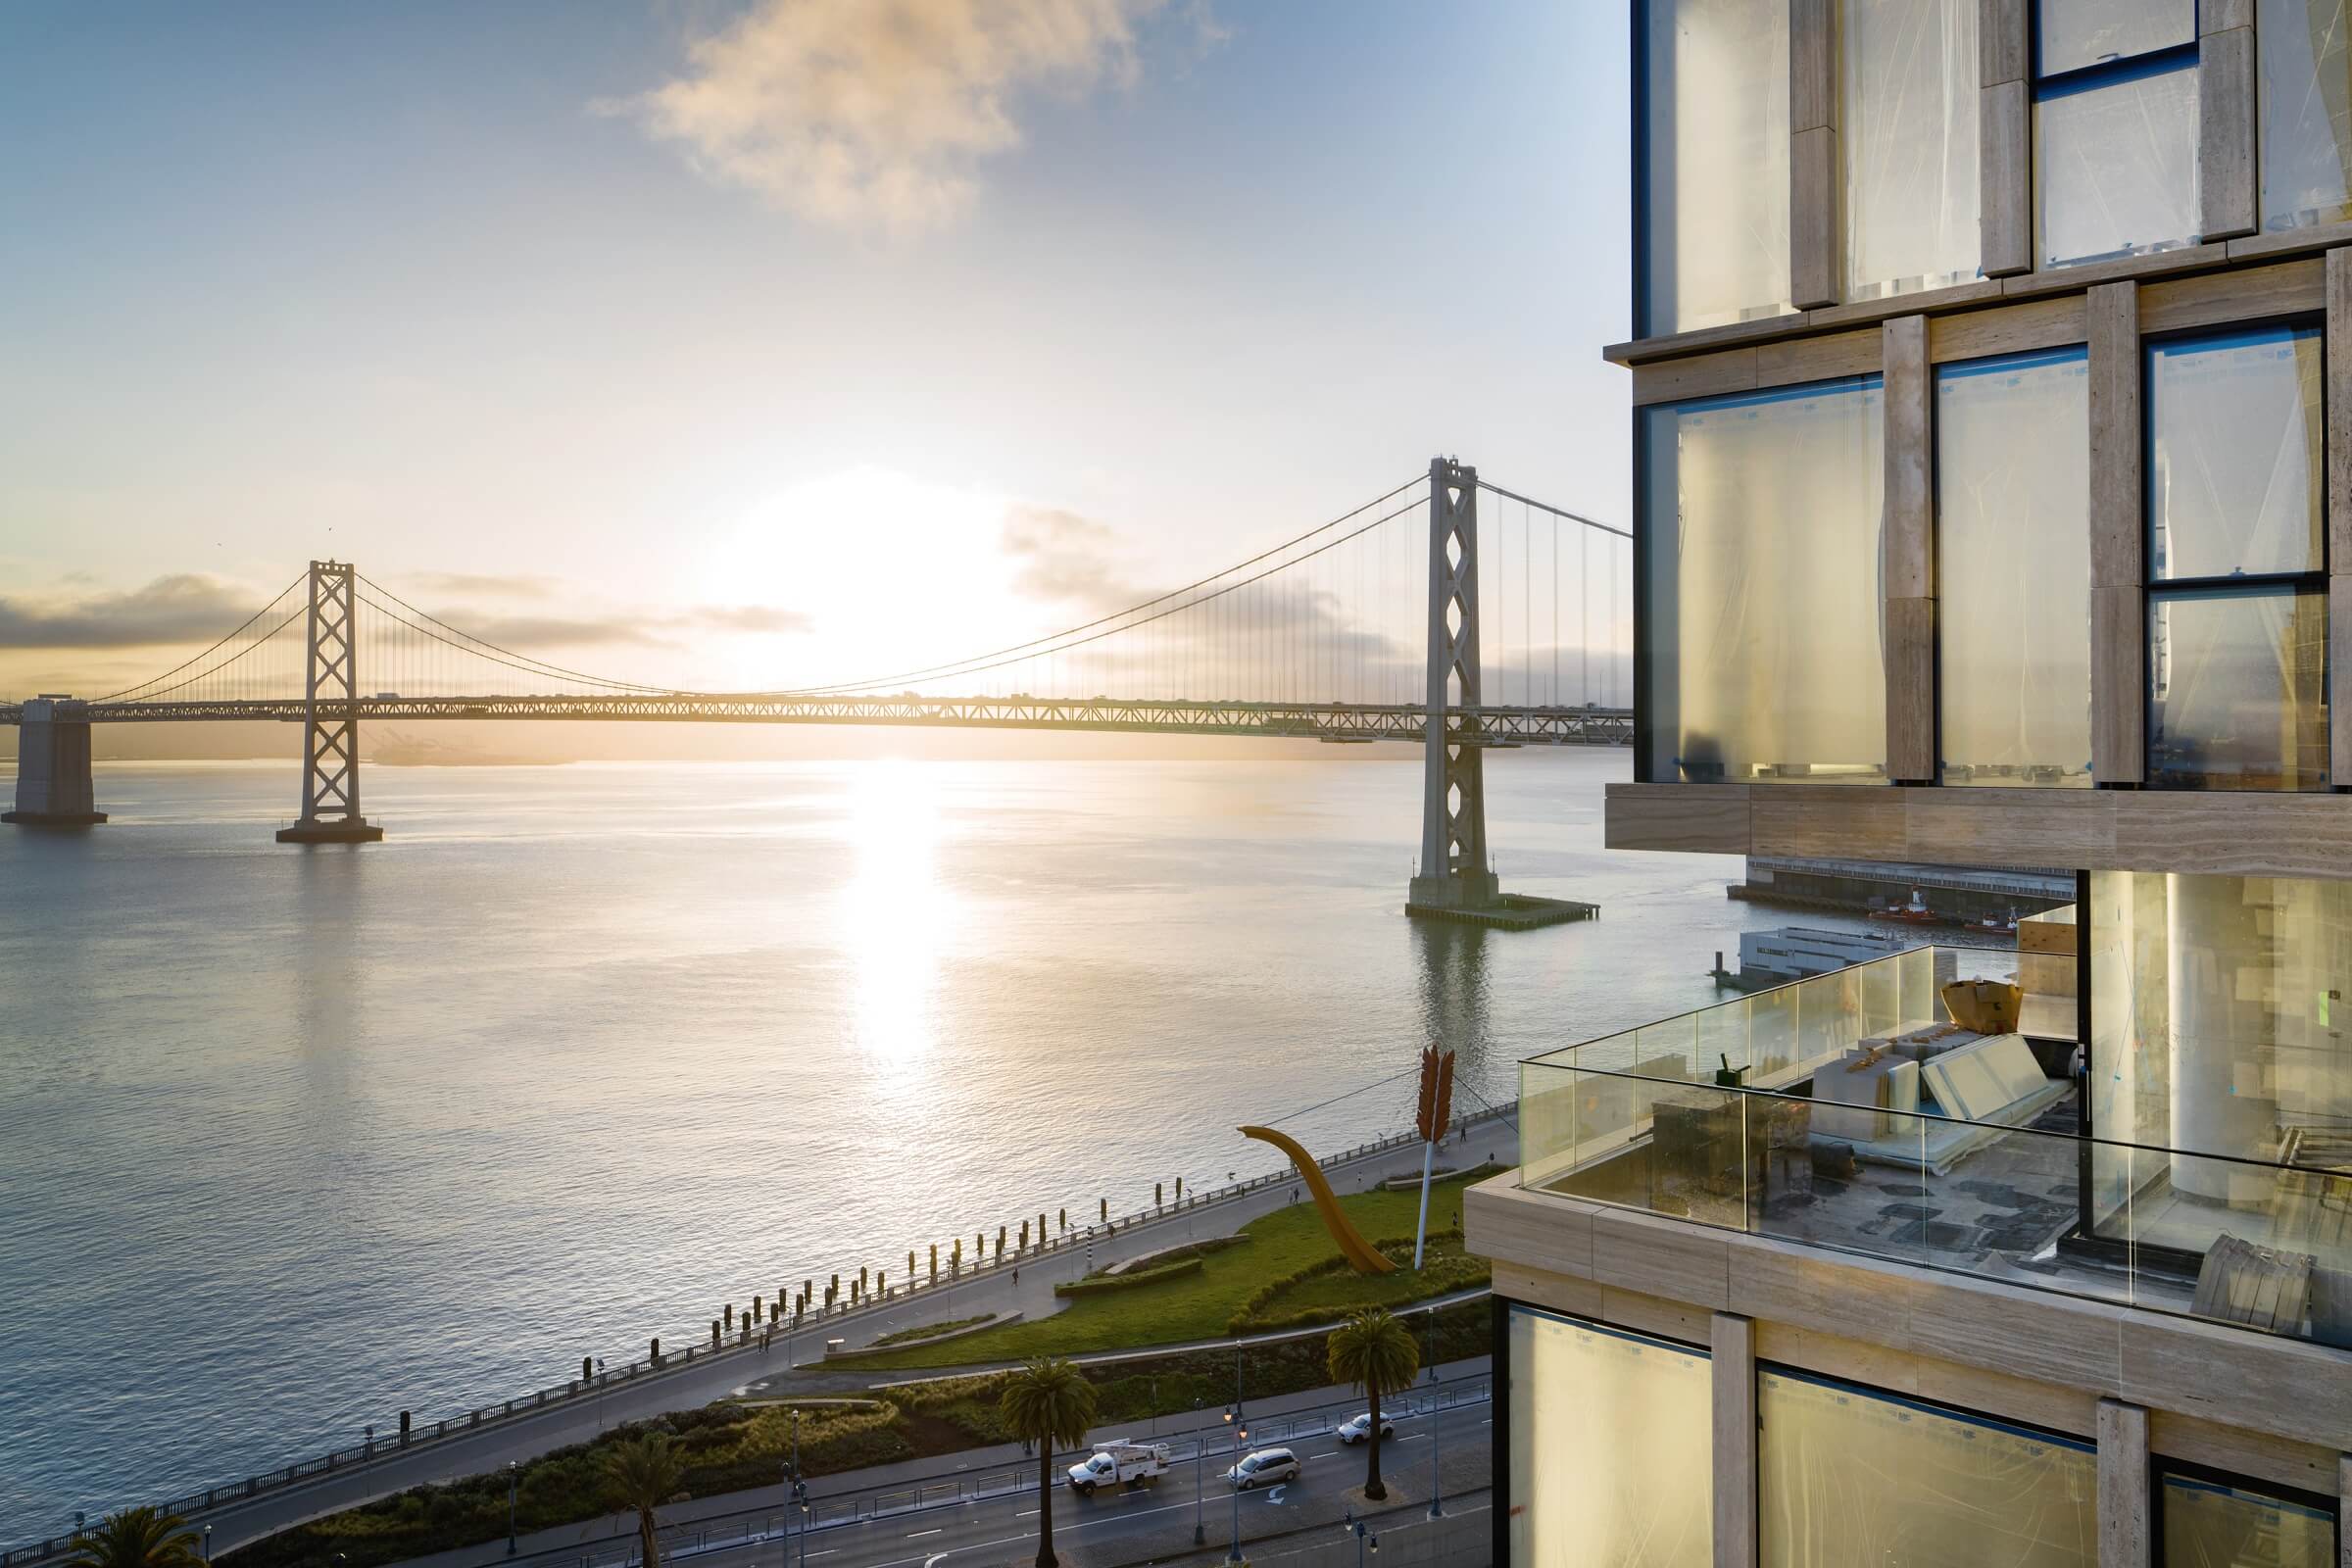 Rendering of the tower looking towards the San Francisco Bay